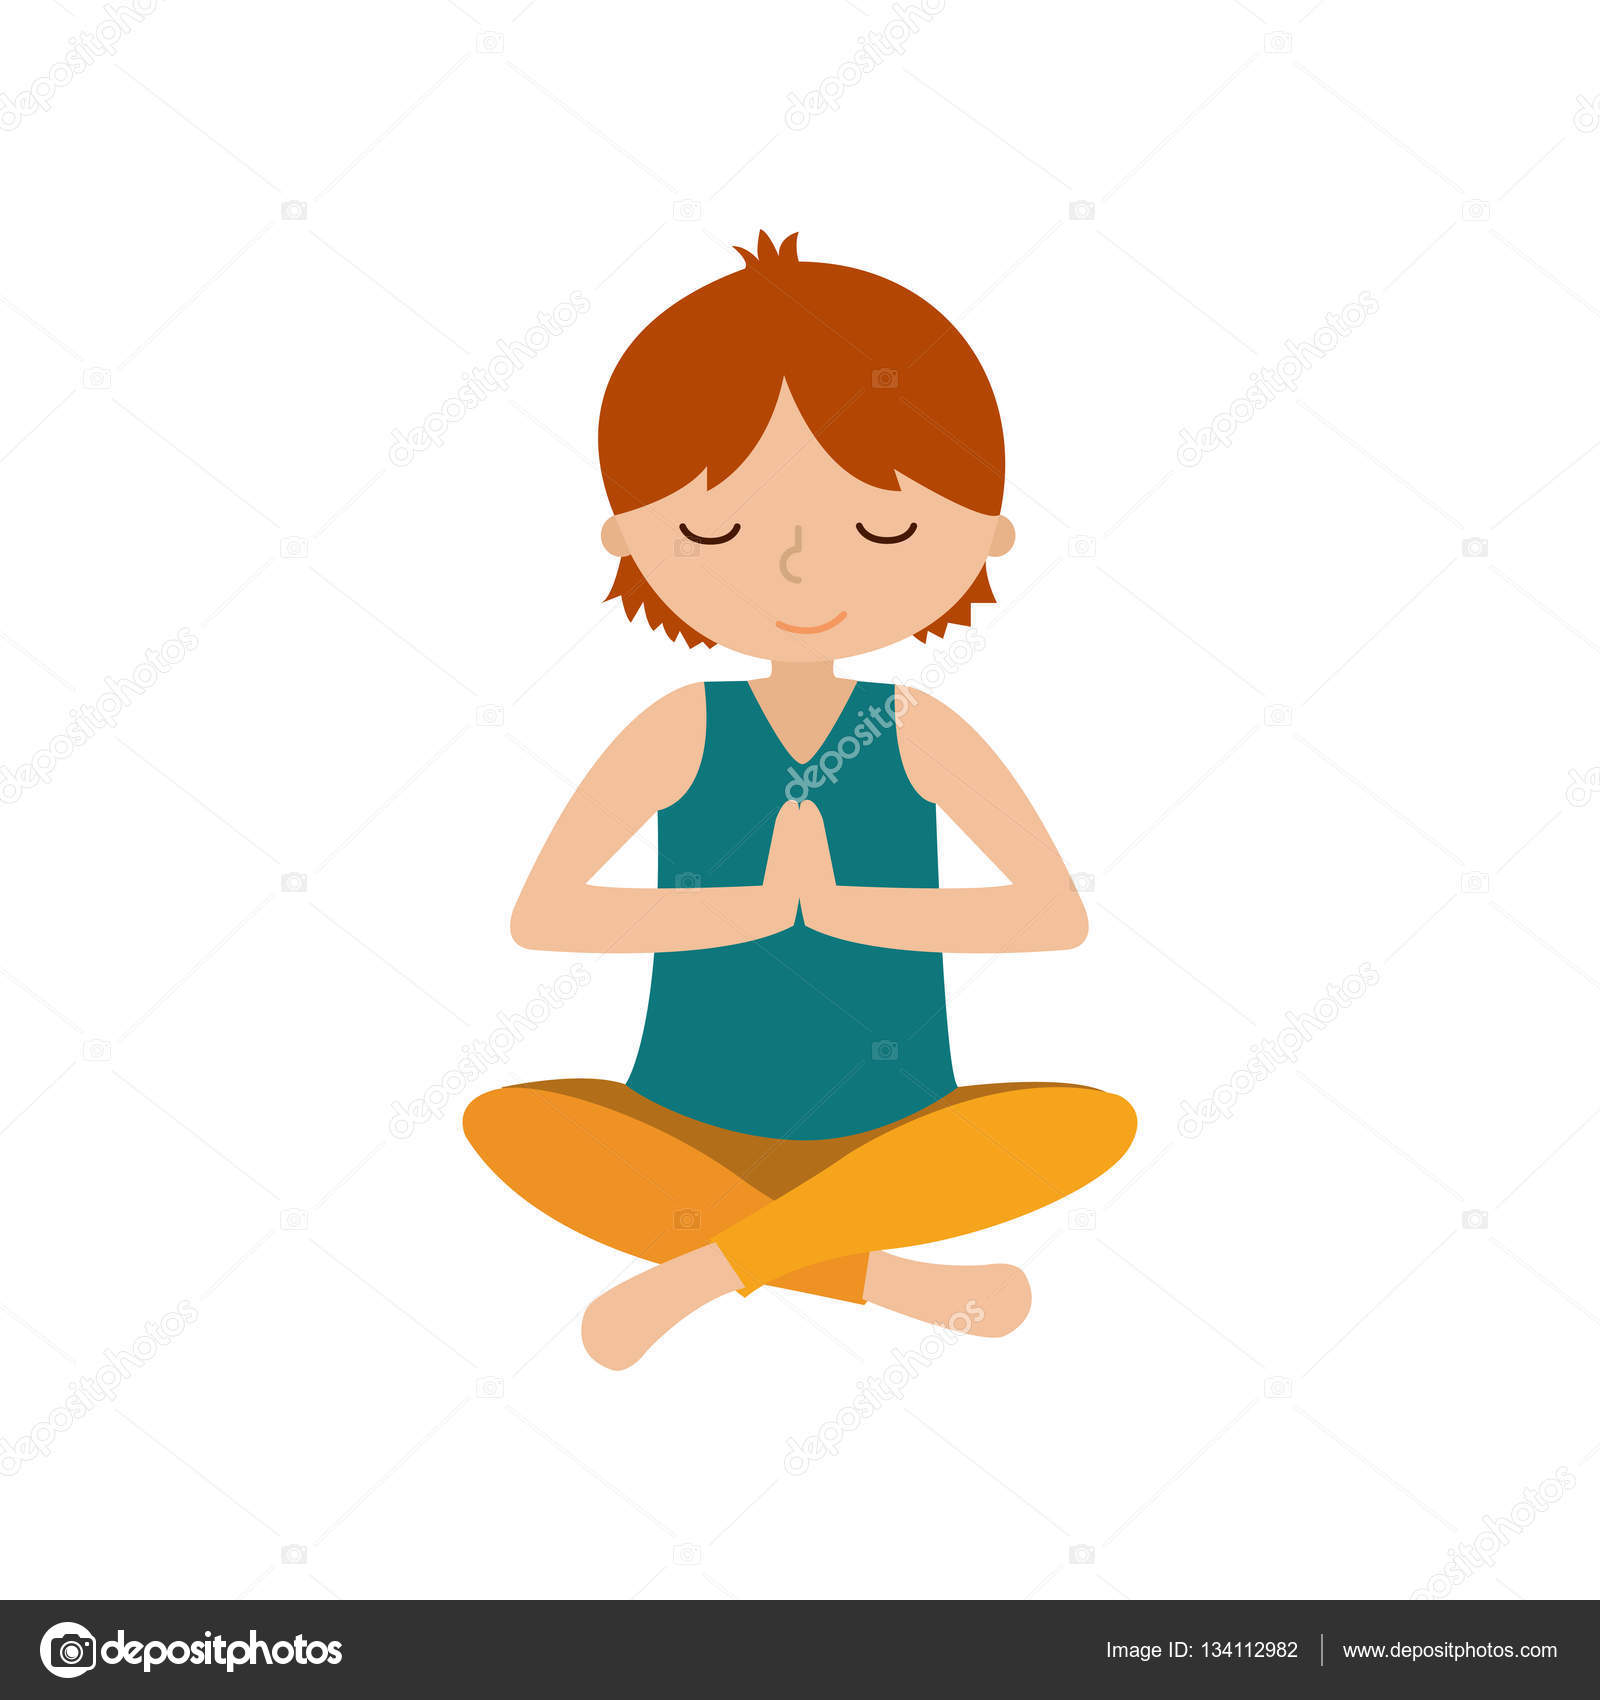 Cute Kids Different Yoga Poses On Stock Vector (Royalty Free